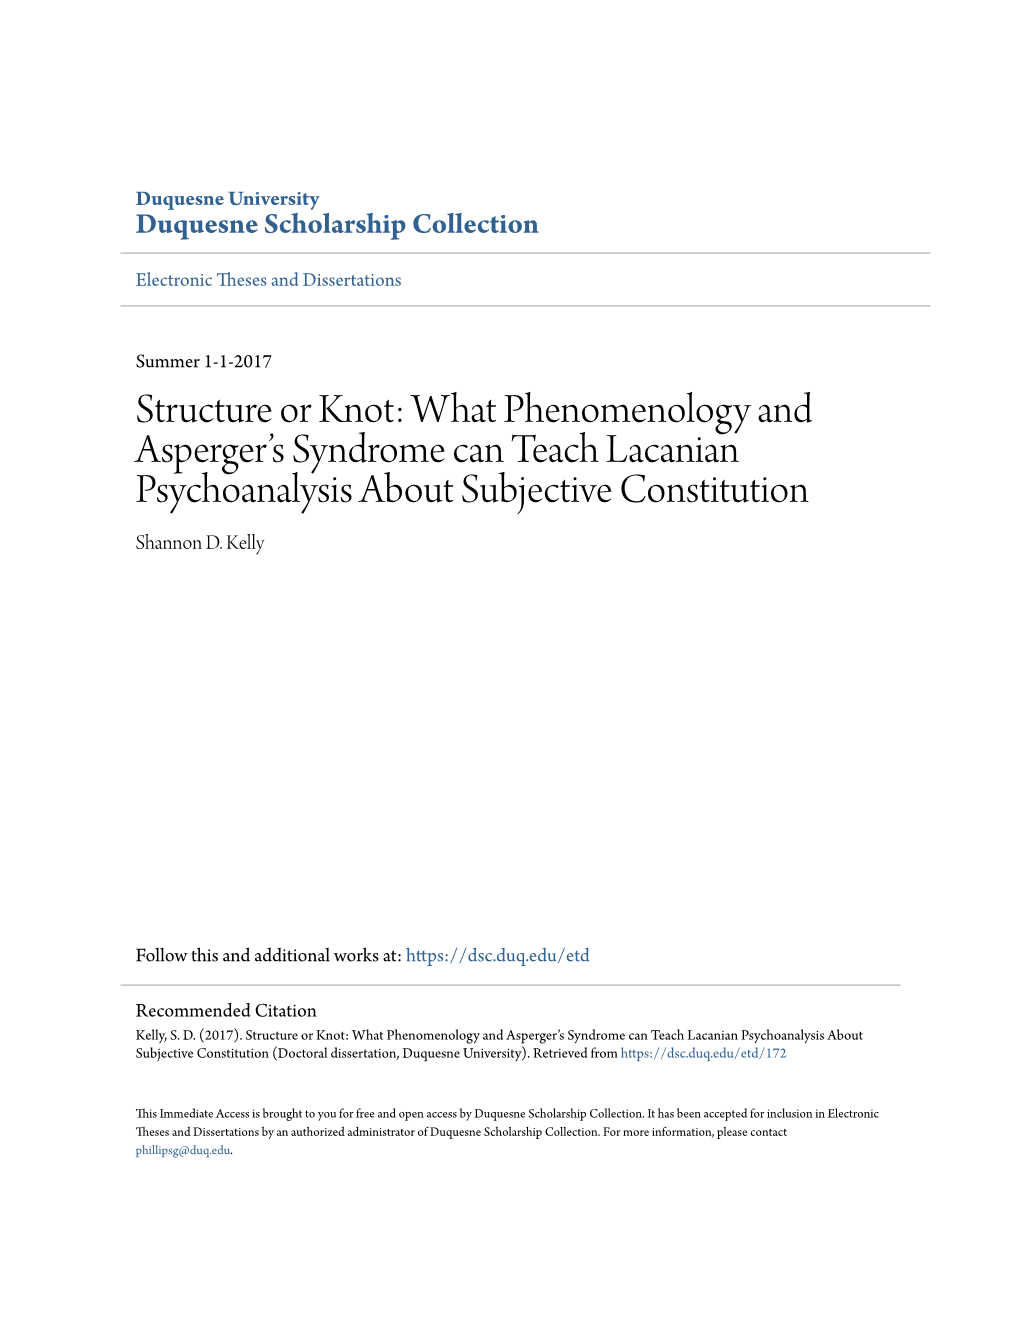 What Phenomenology and Asperger's